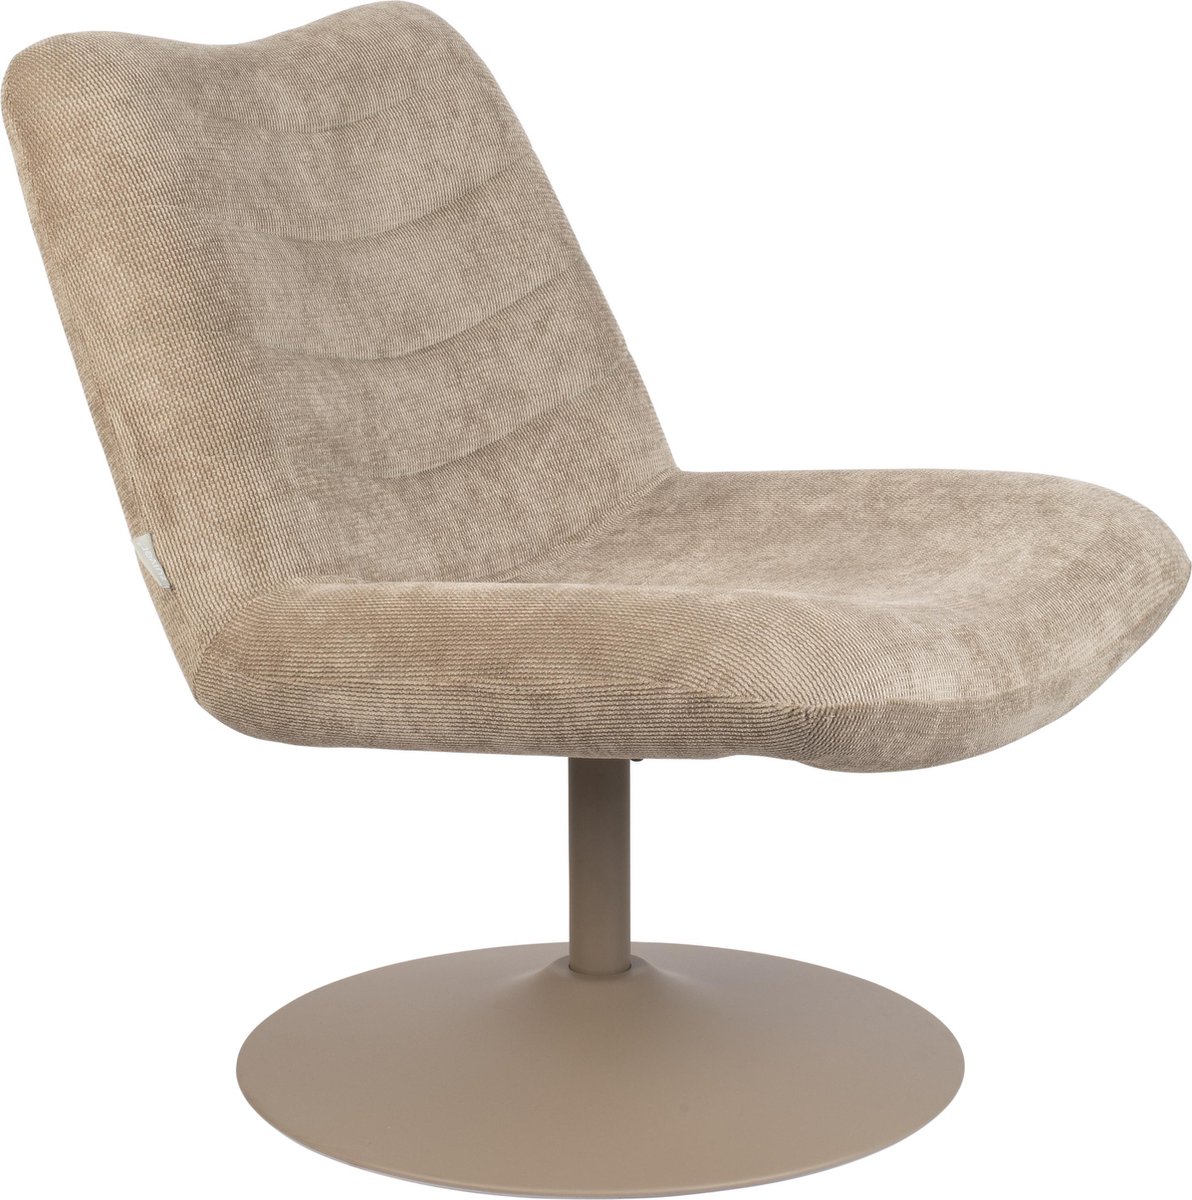 Zuiver Bubba Fauteuil - - Beige